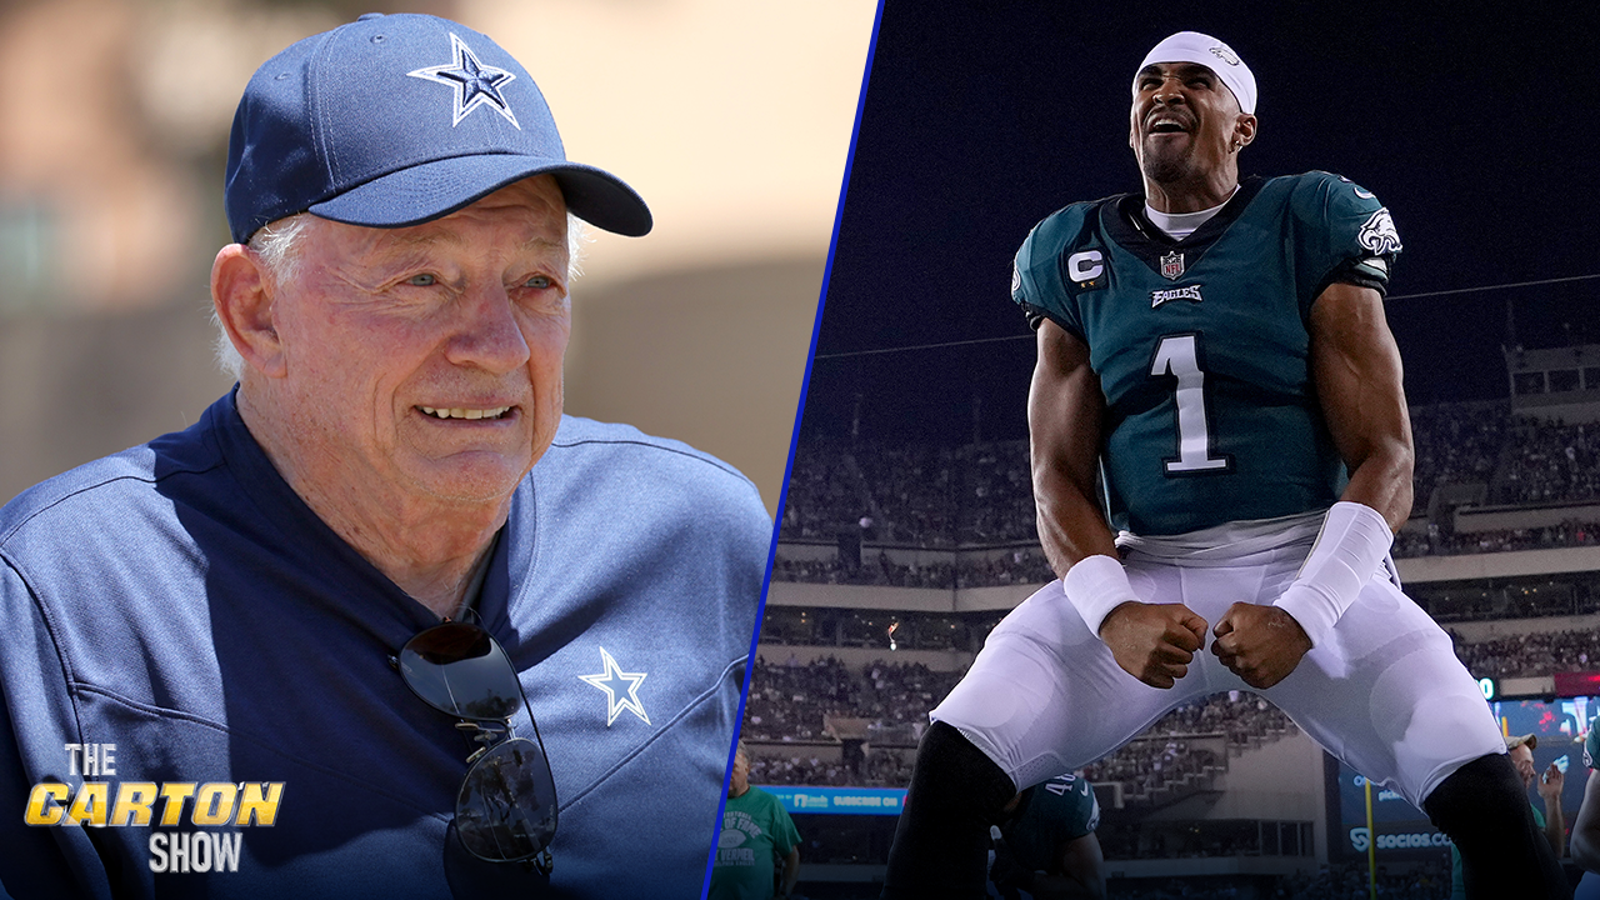 Jerry Jones voices early concern over Jalen Hurts, Eagles | THE CARTON SHOW